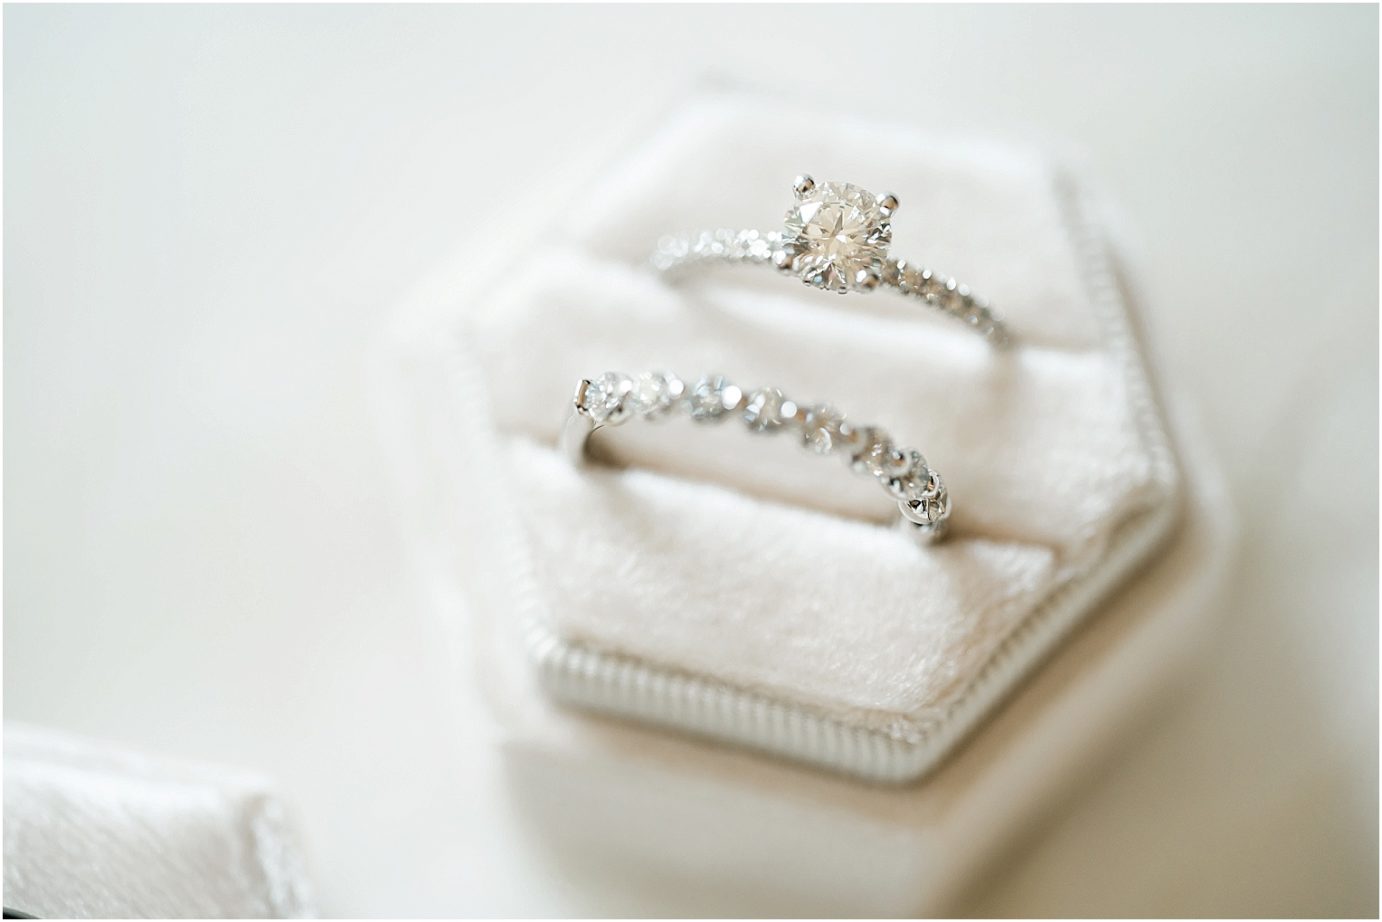 Ring shot with ring box from wedding details styling kit